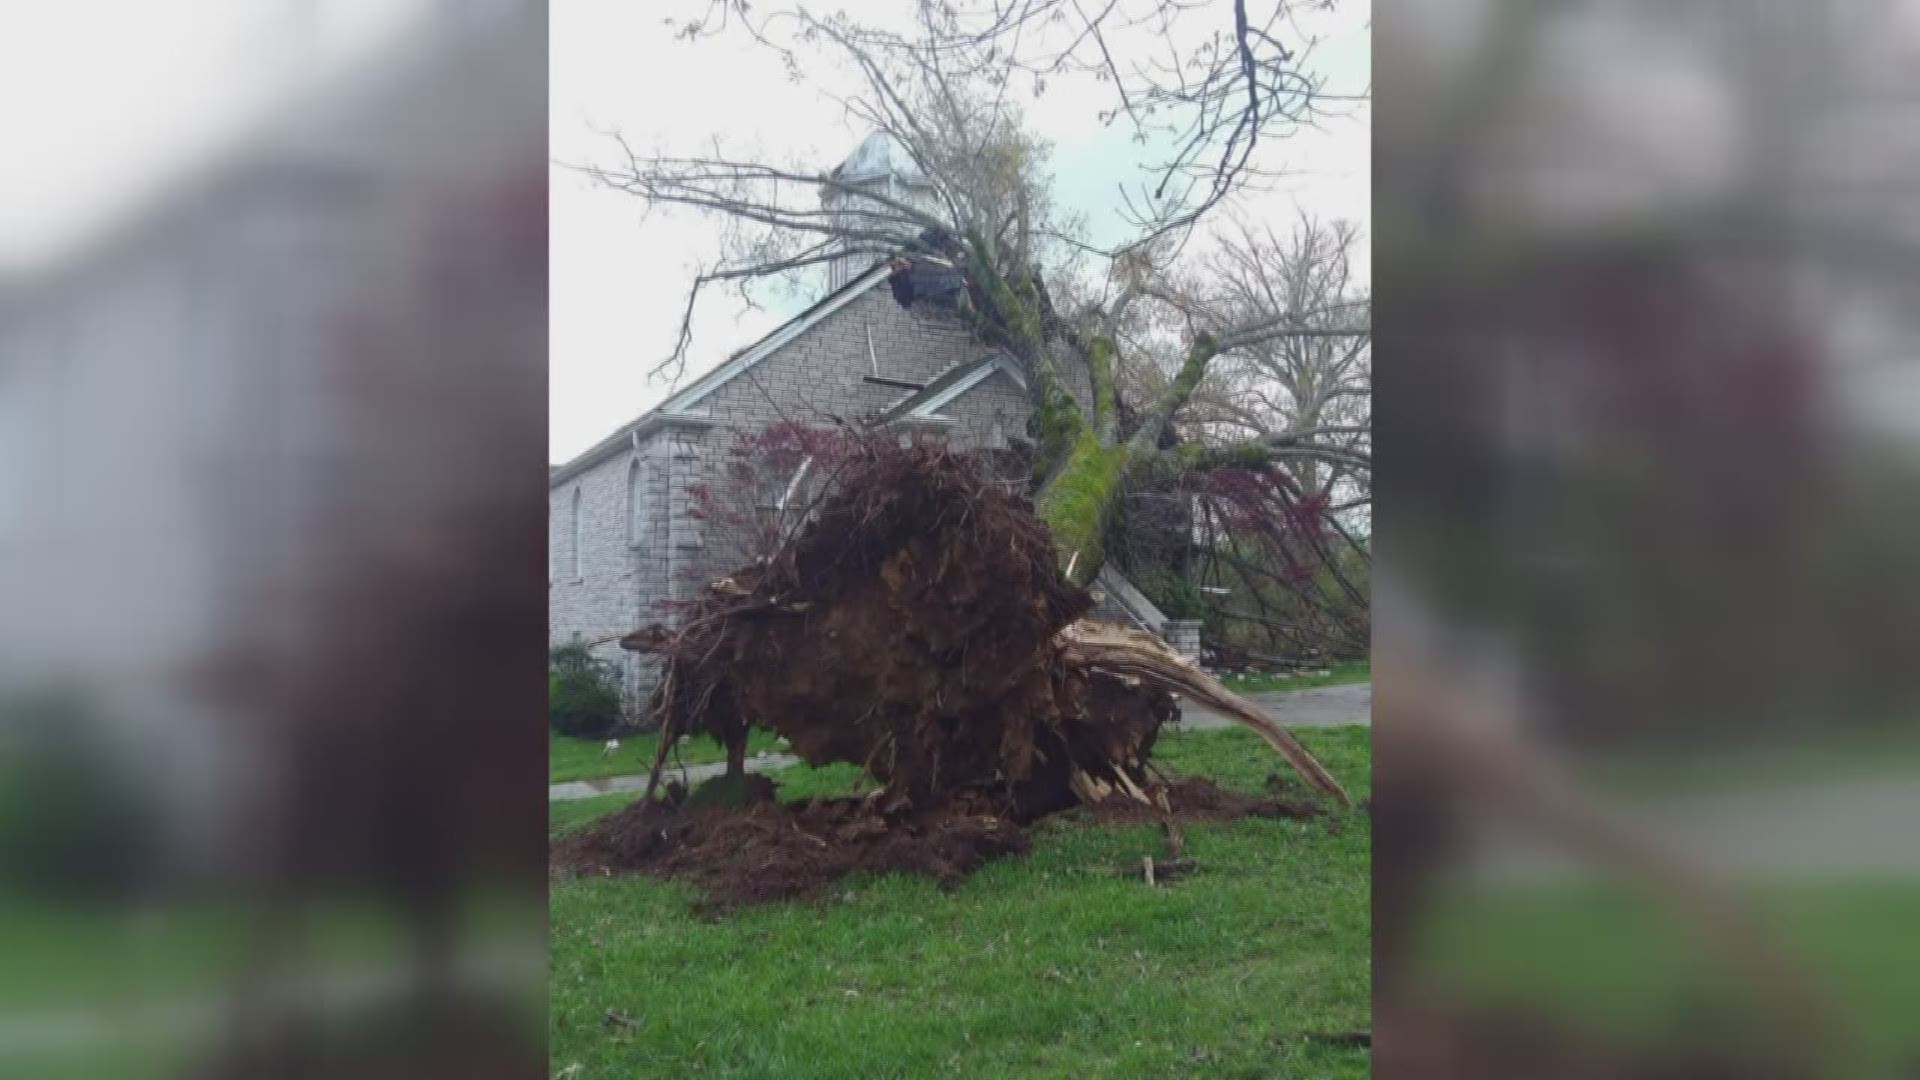 A strong line of storms swept through East Tennessee early this morning causing building damages and power outages from Cumberland to Knox County.